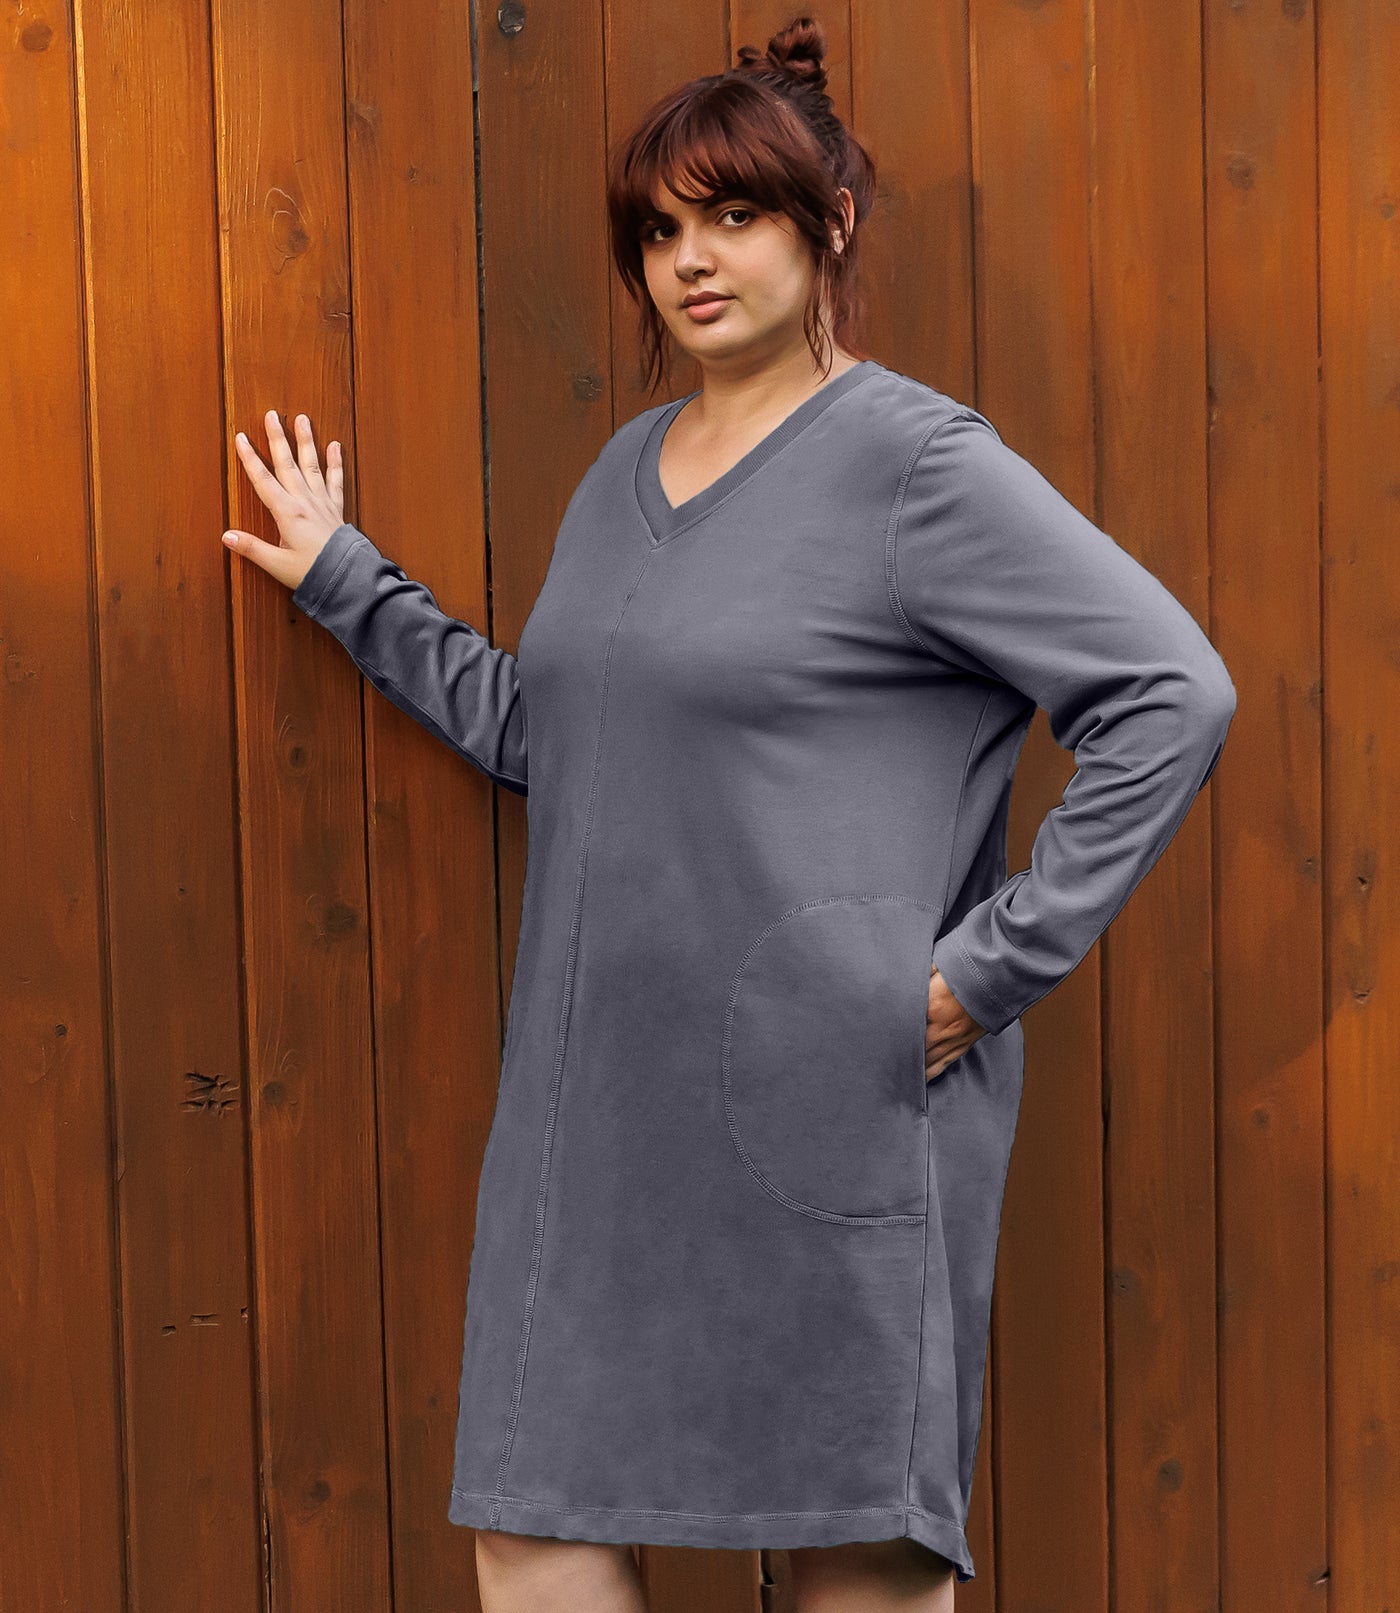 Plus-size model, facing forward, right hand on wall, left hand in dress pocket. Wearing JunoActive's Legacy Cotton Casual Pocketed Long Sleeve Dress in Misty Grey.